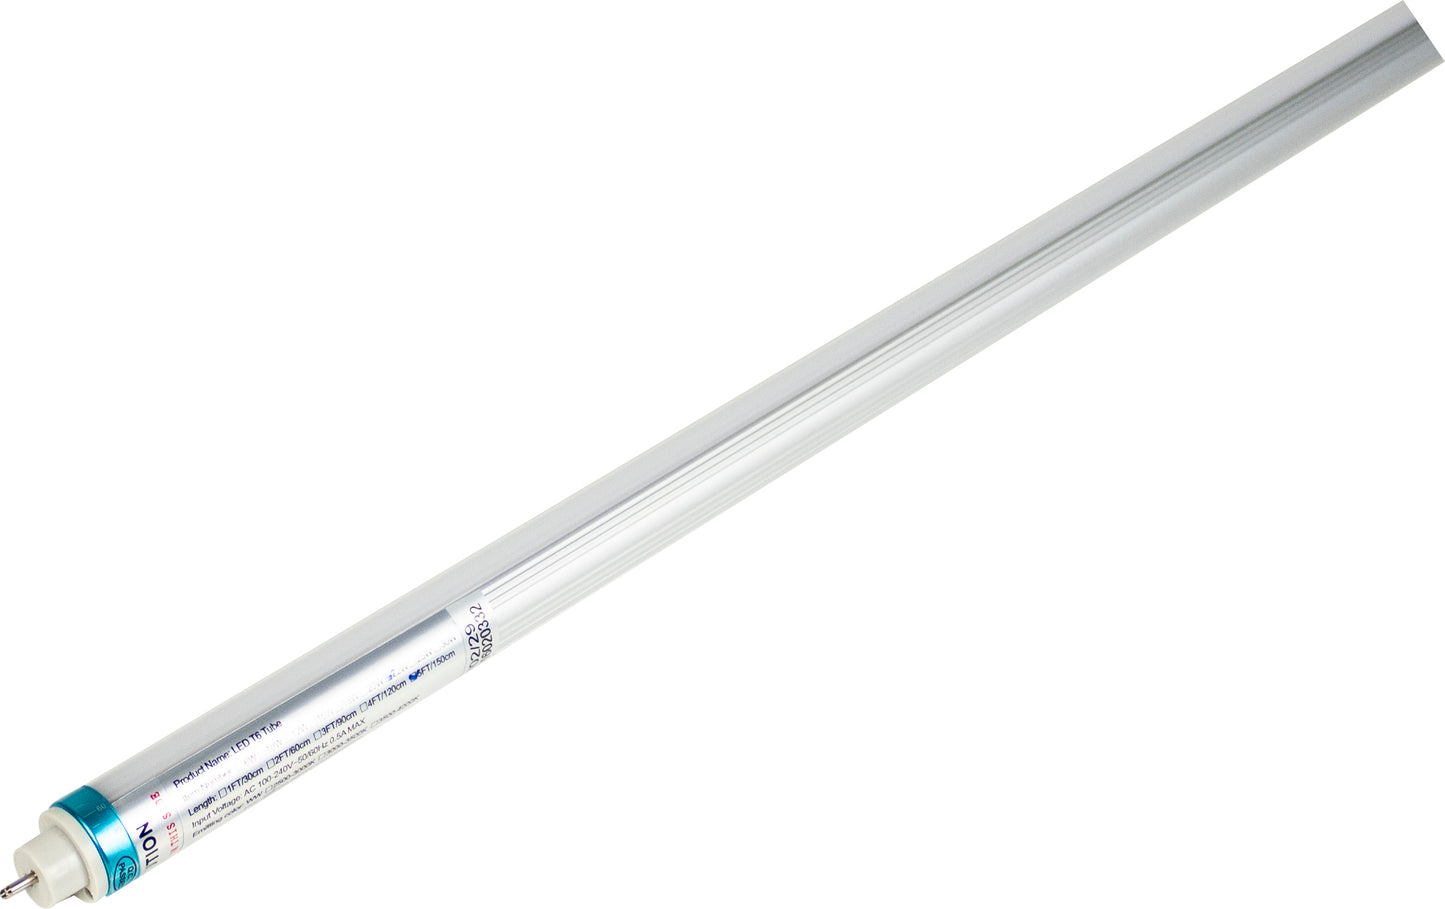 T5 LED buis 18W 840 1149mm 2340 lm